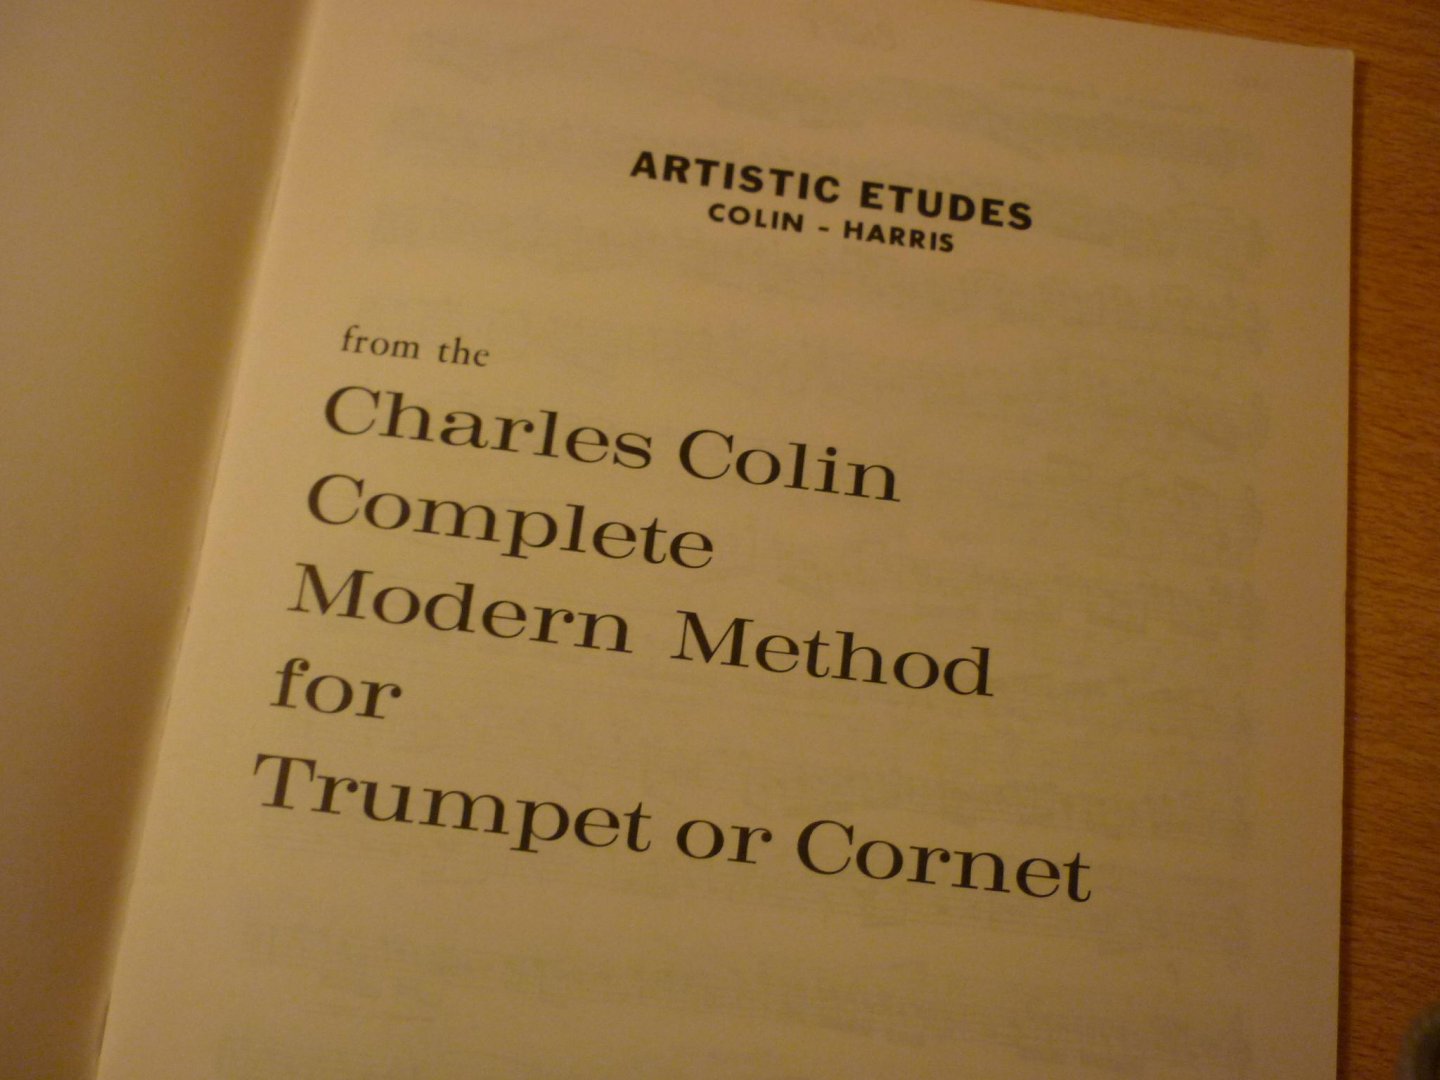 Colin; Charles en Aaron Harris - Artistic Etudes - From The Charles Colin Complete Modern Method For Trumpet Or Cornet; Trompet-methode